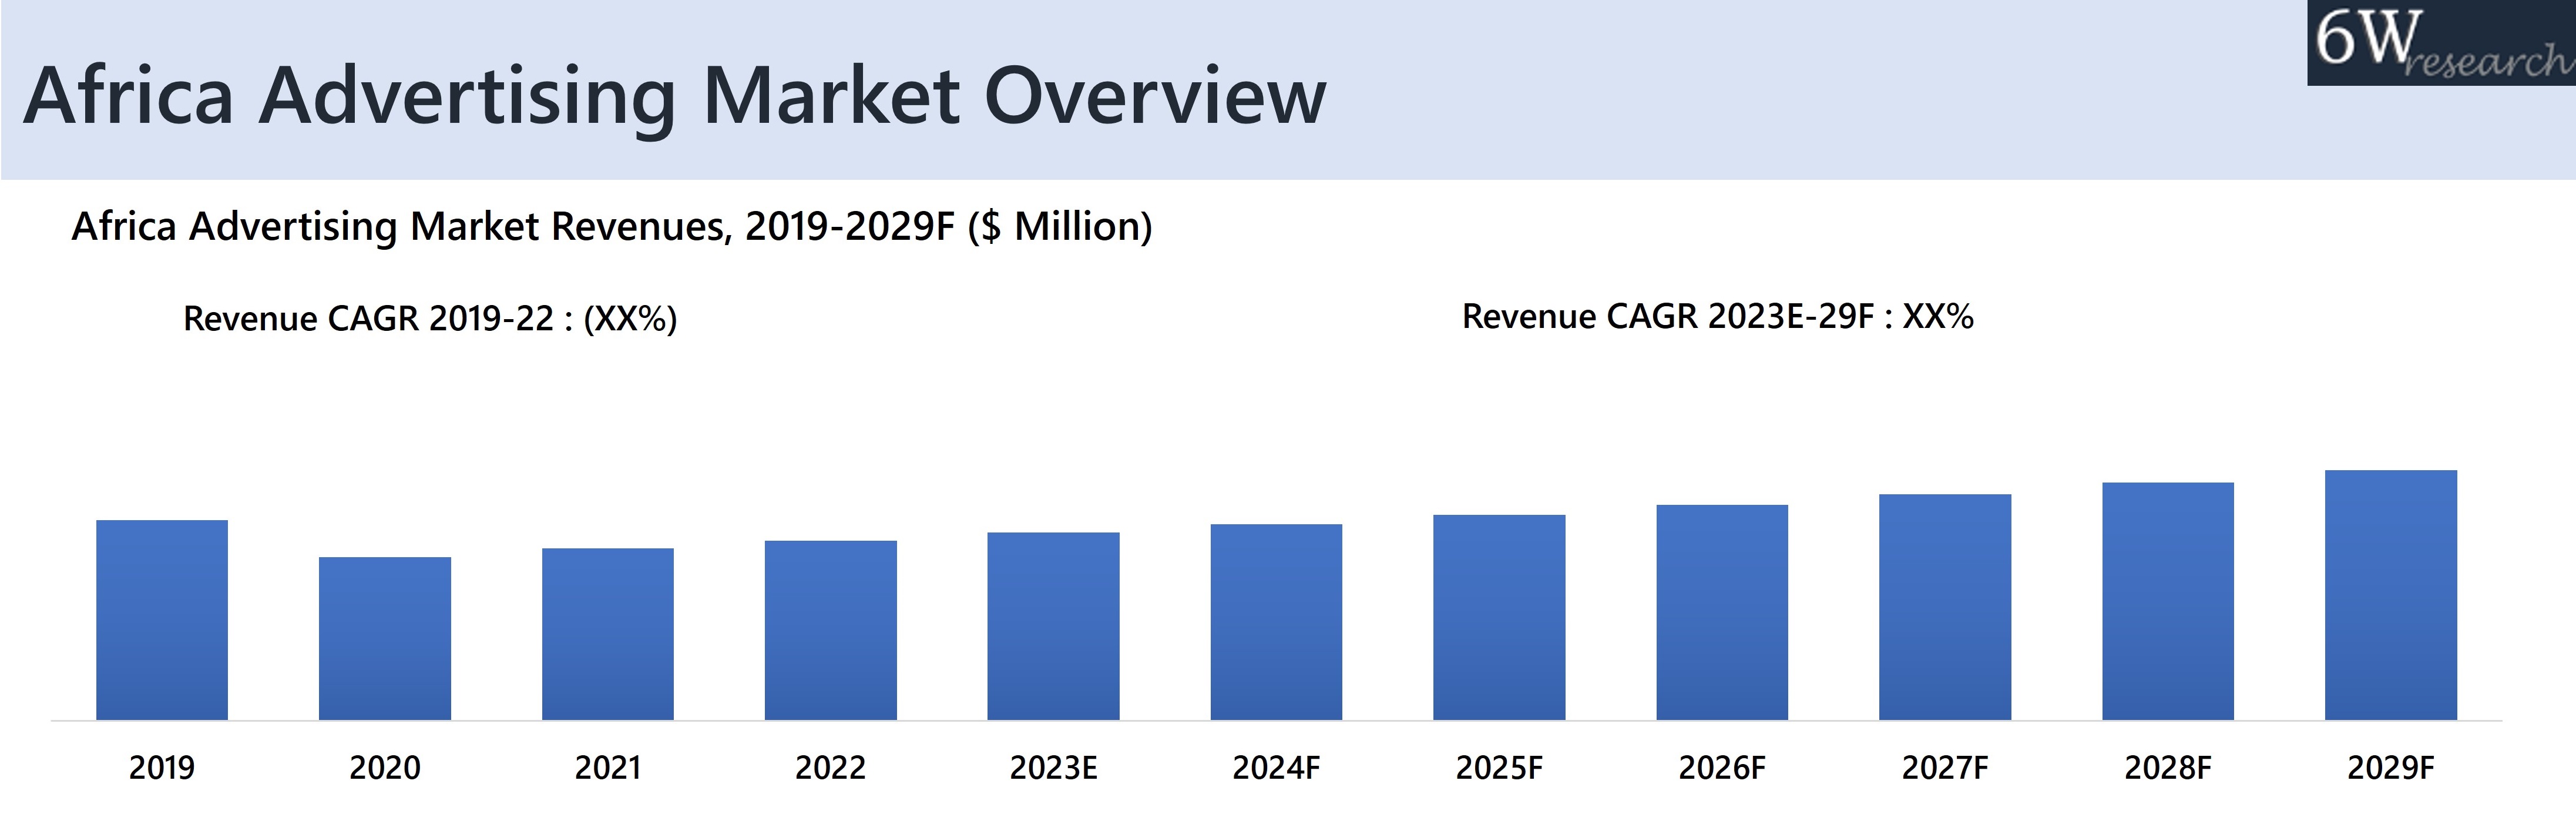 Africa Advertising Market Overview